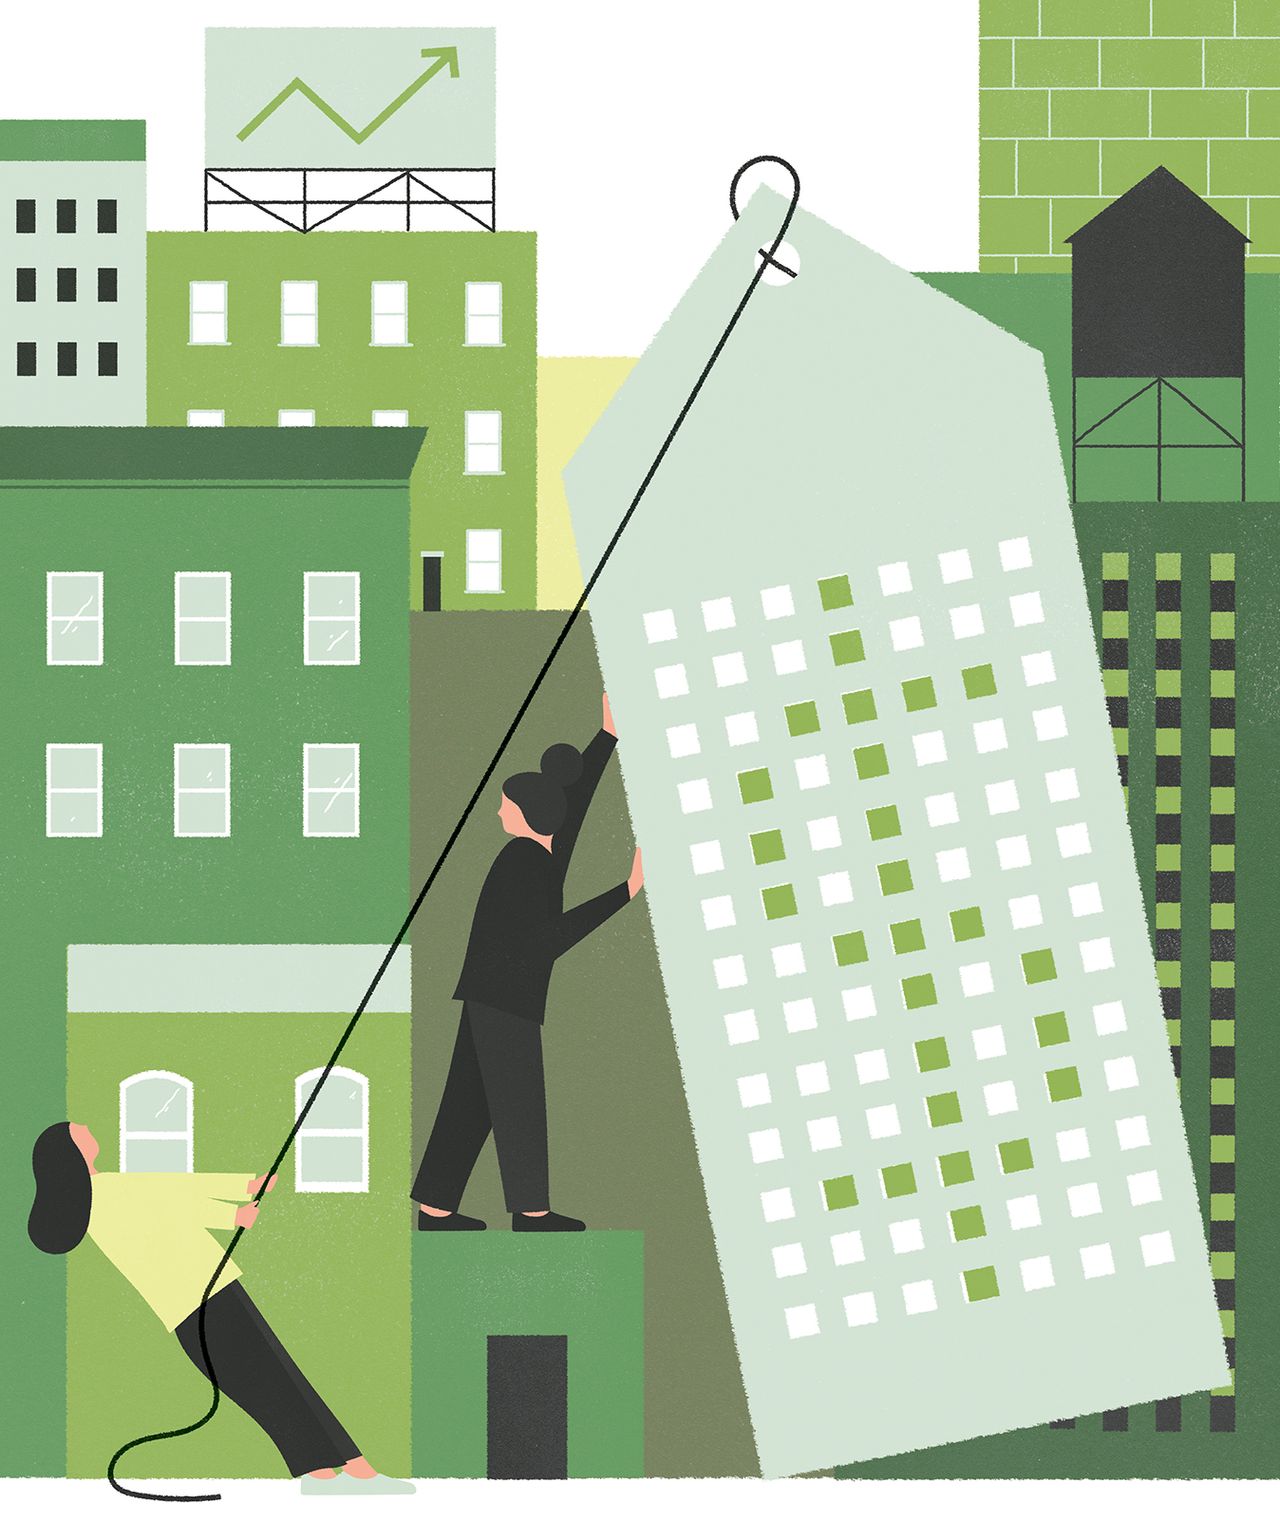 Illustration about inflation, greedflation and economics for The New York Times